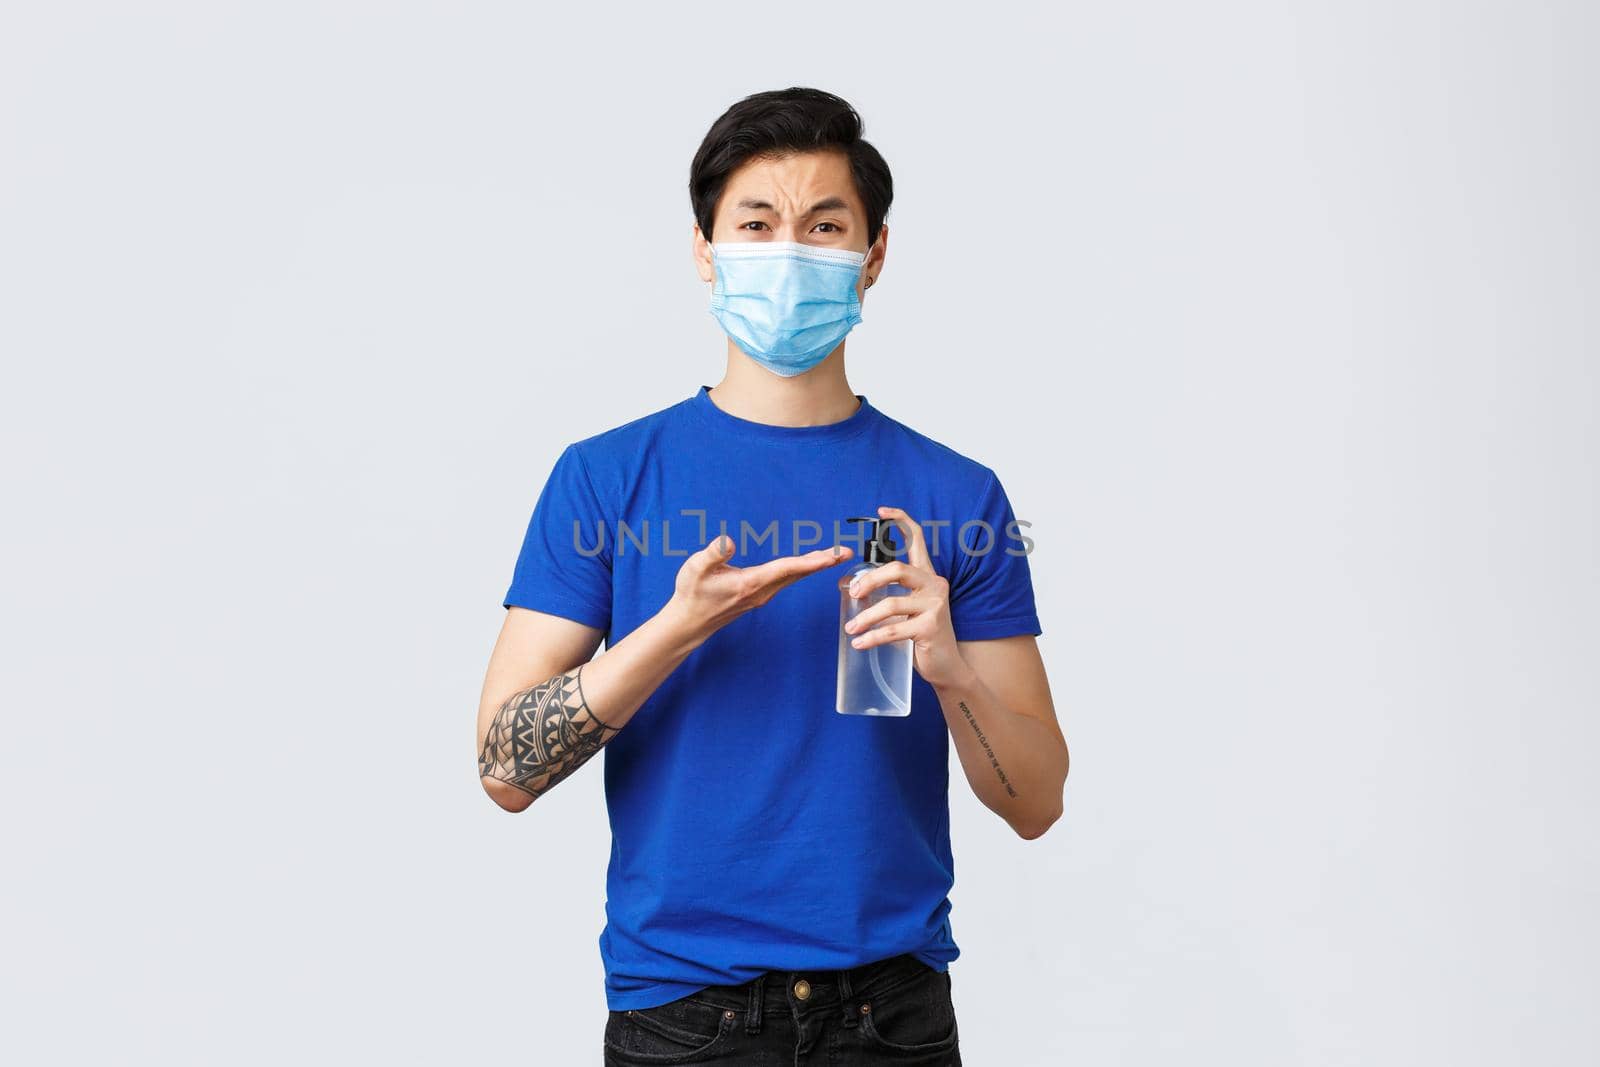 Lifestyle, people different emotions and covid-19 pandemic concept. Disgusted and upset grimacing asian man in medical mask hurry up to use hand sanitizer after handshake, grey background.